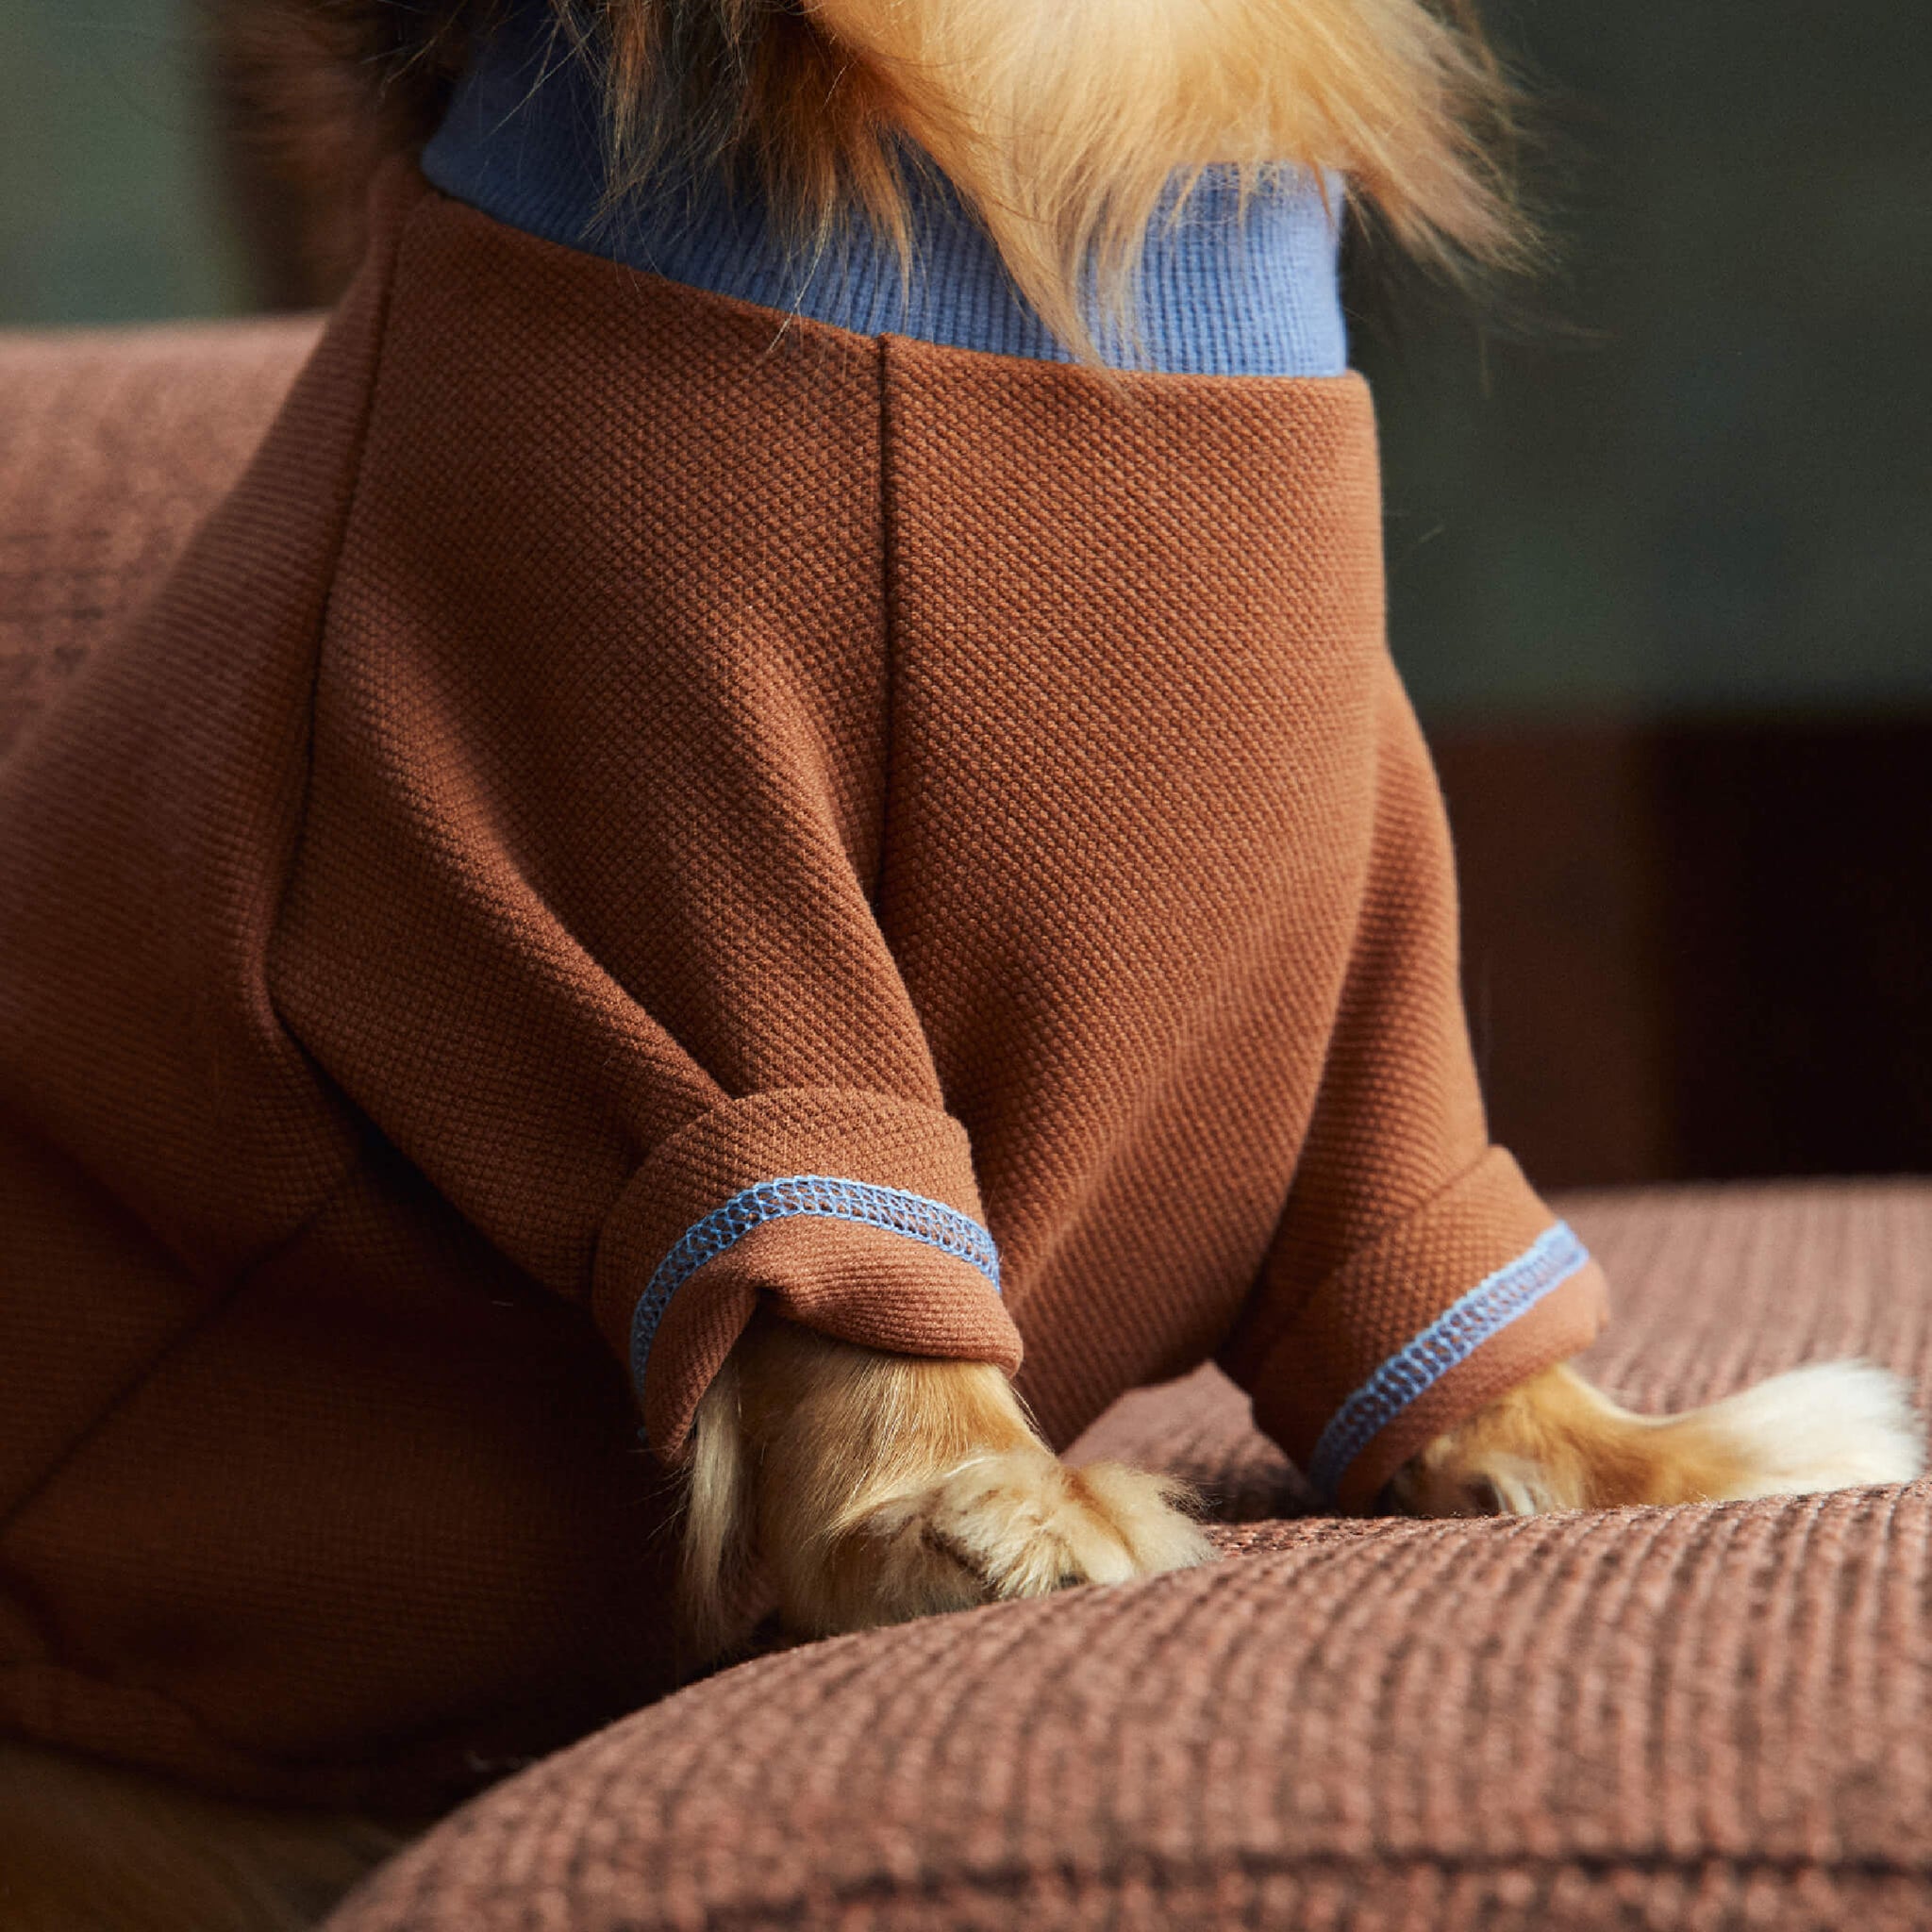 Upclose view of nies pullover in brown with blue accent stitching and collar. Model is wearing a size L.